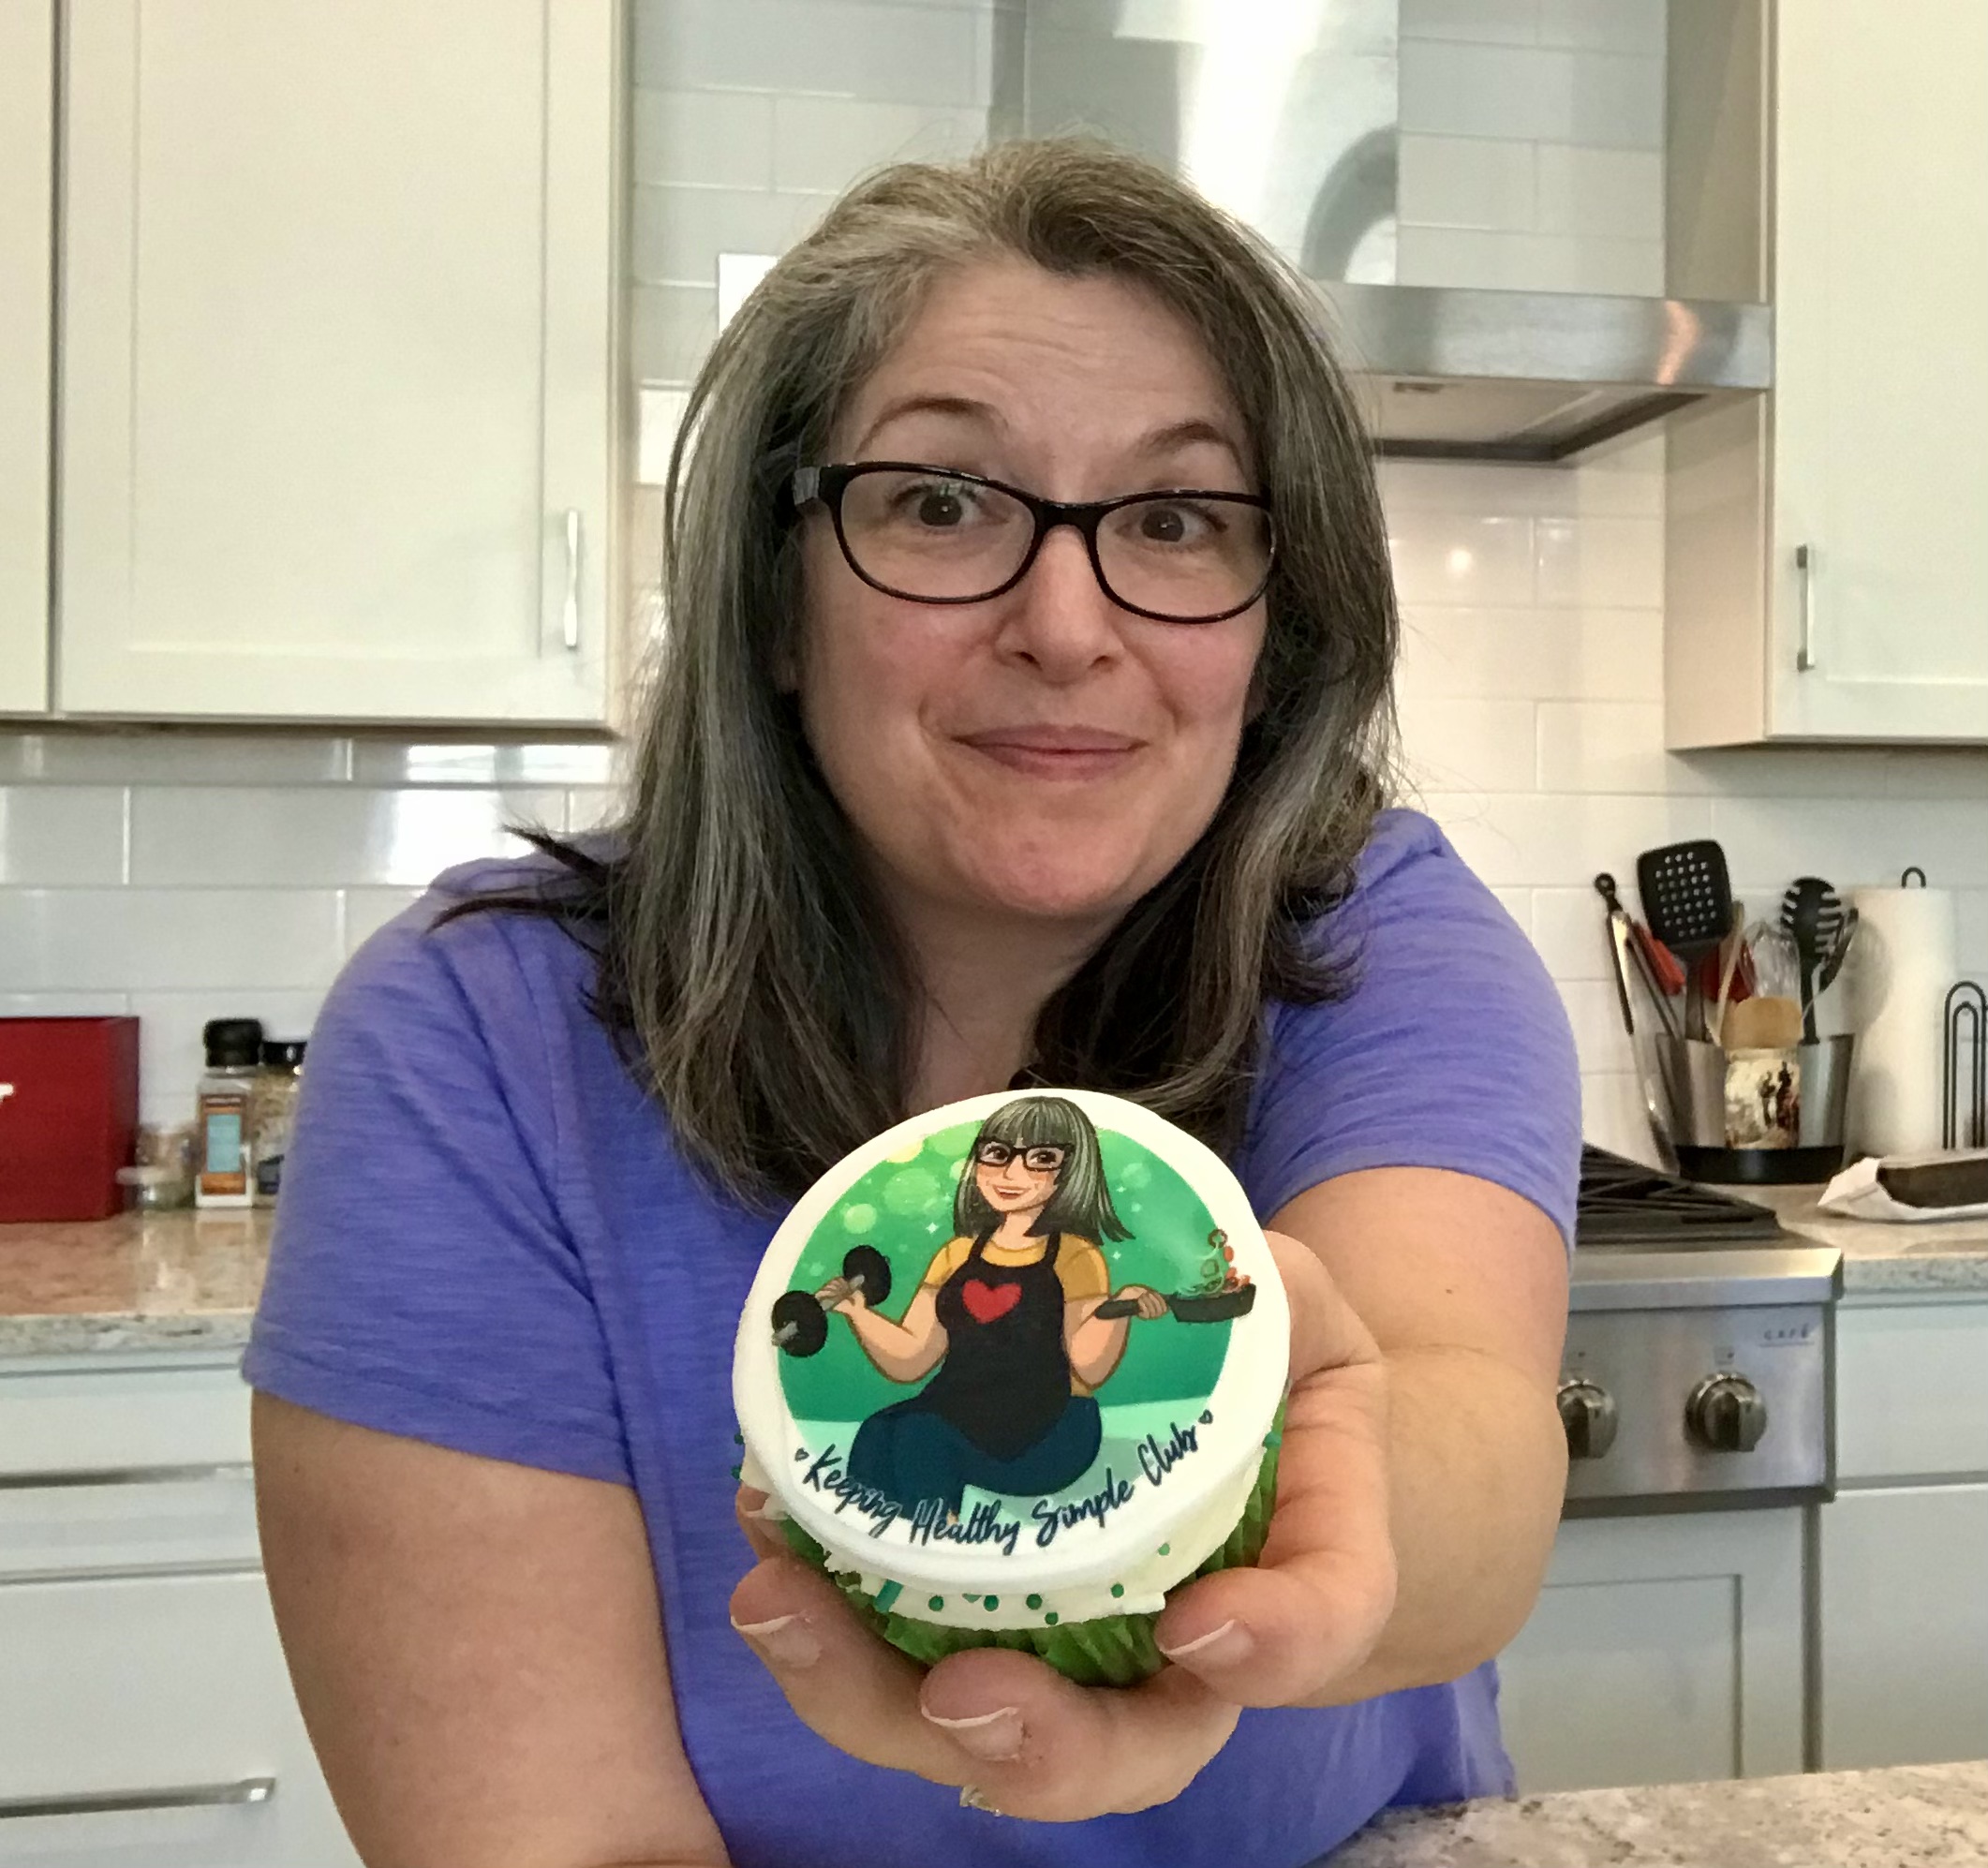 Alexa Lewis holding a cupcake that has her business logo on it